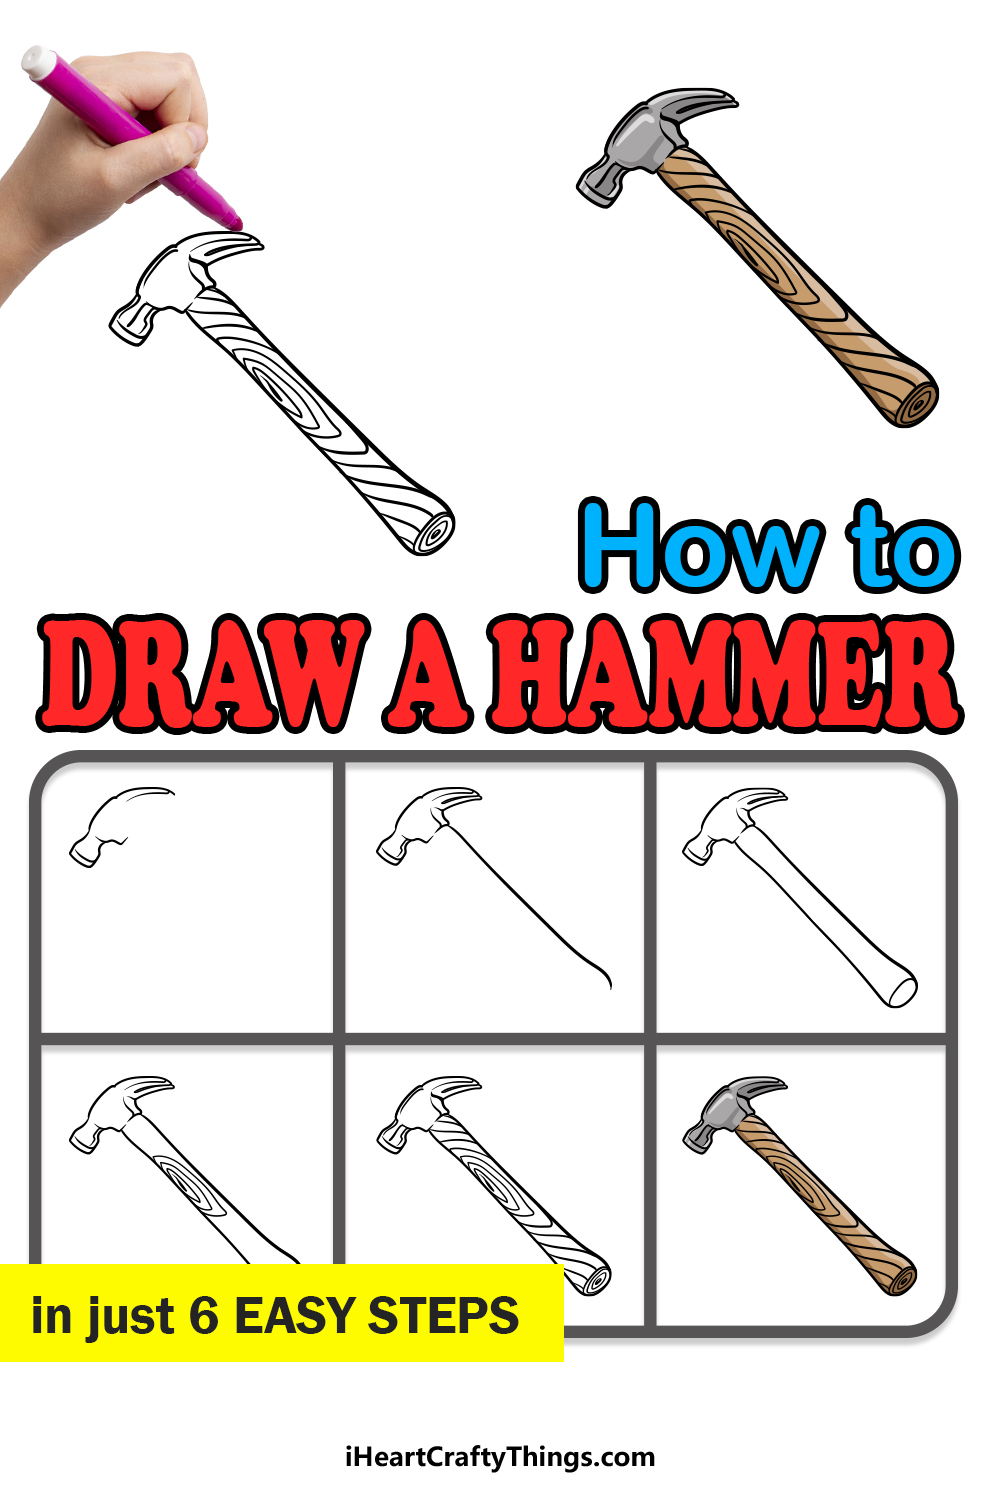 how to draw a hammer in 6 easy steps